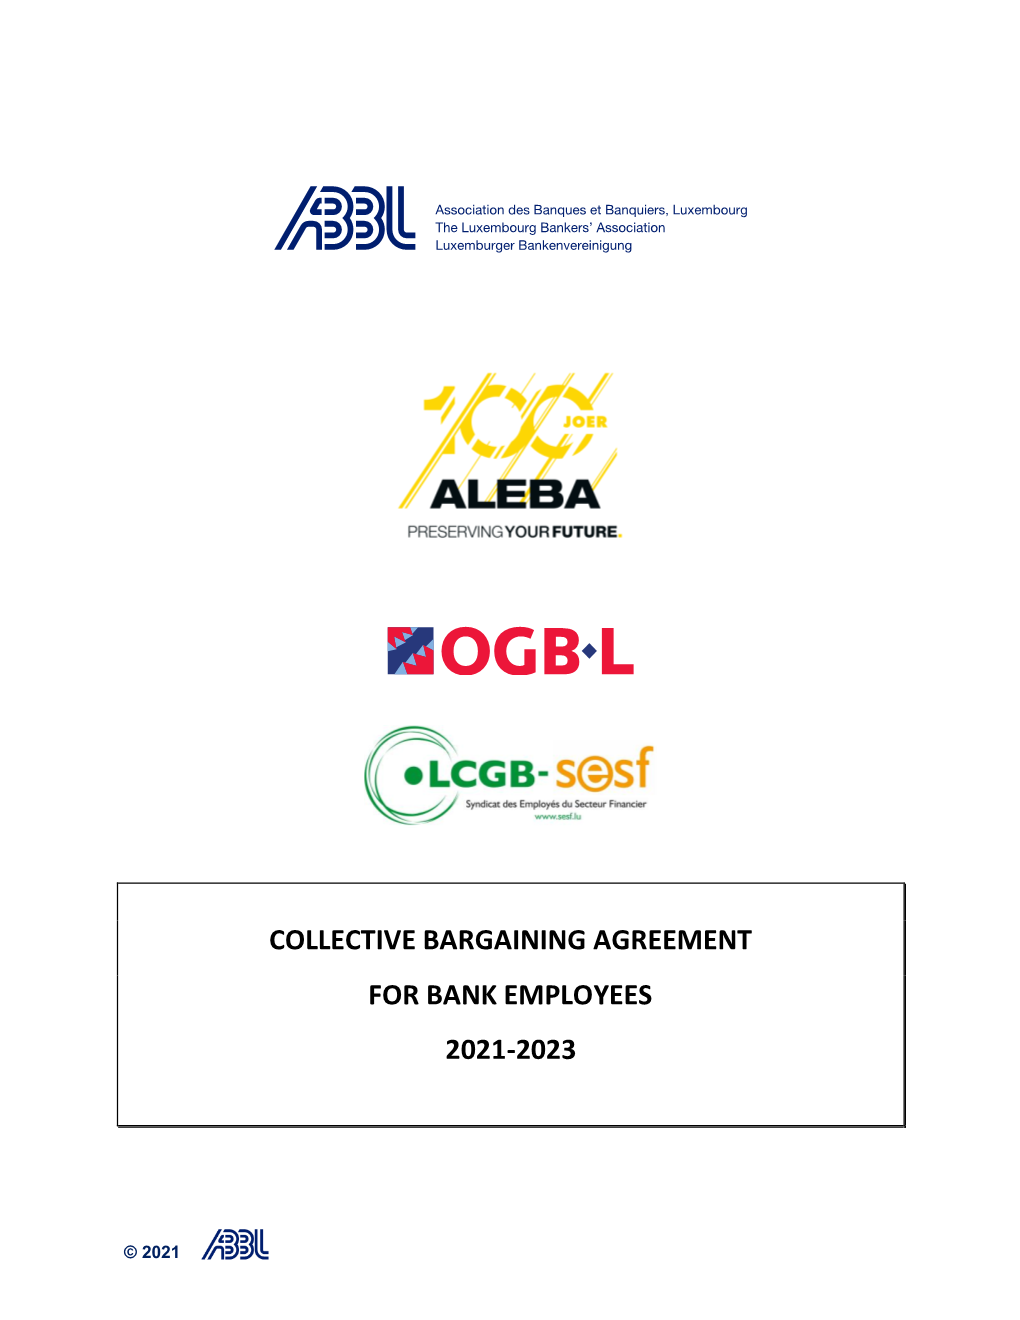 Collective Bargaining Agreement for Bank Employees 2021-2023